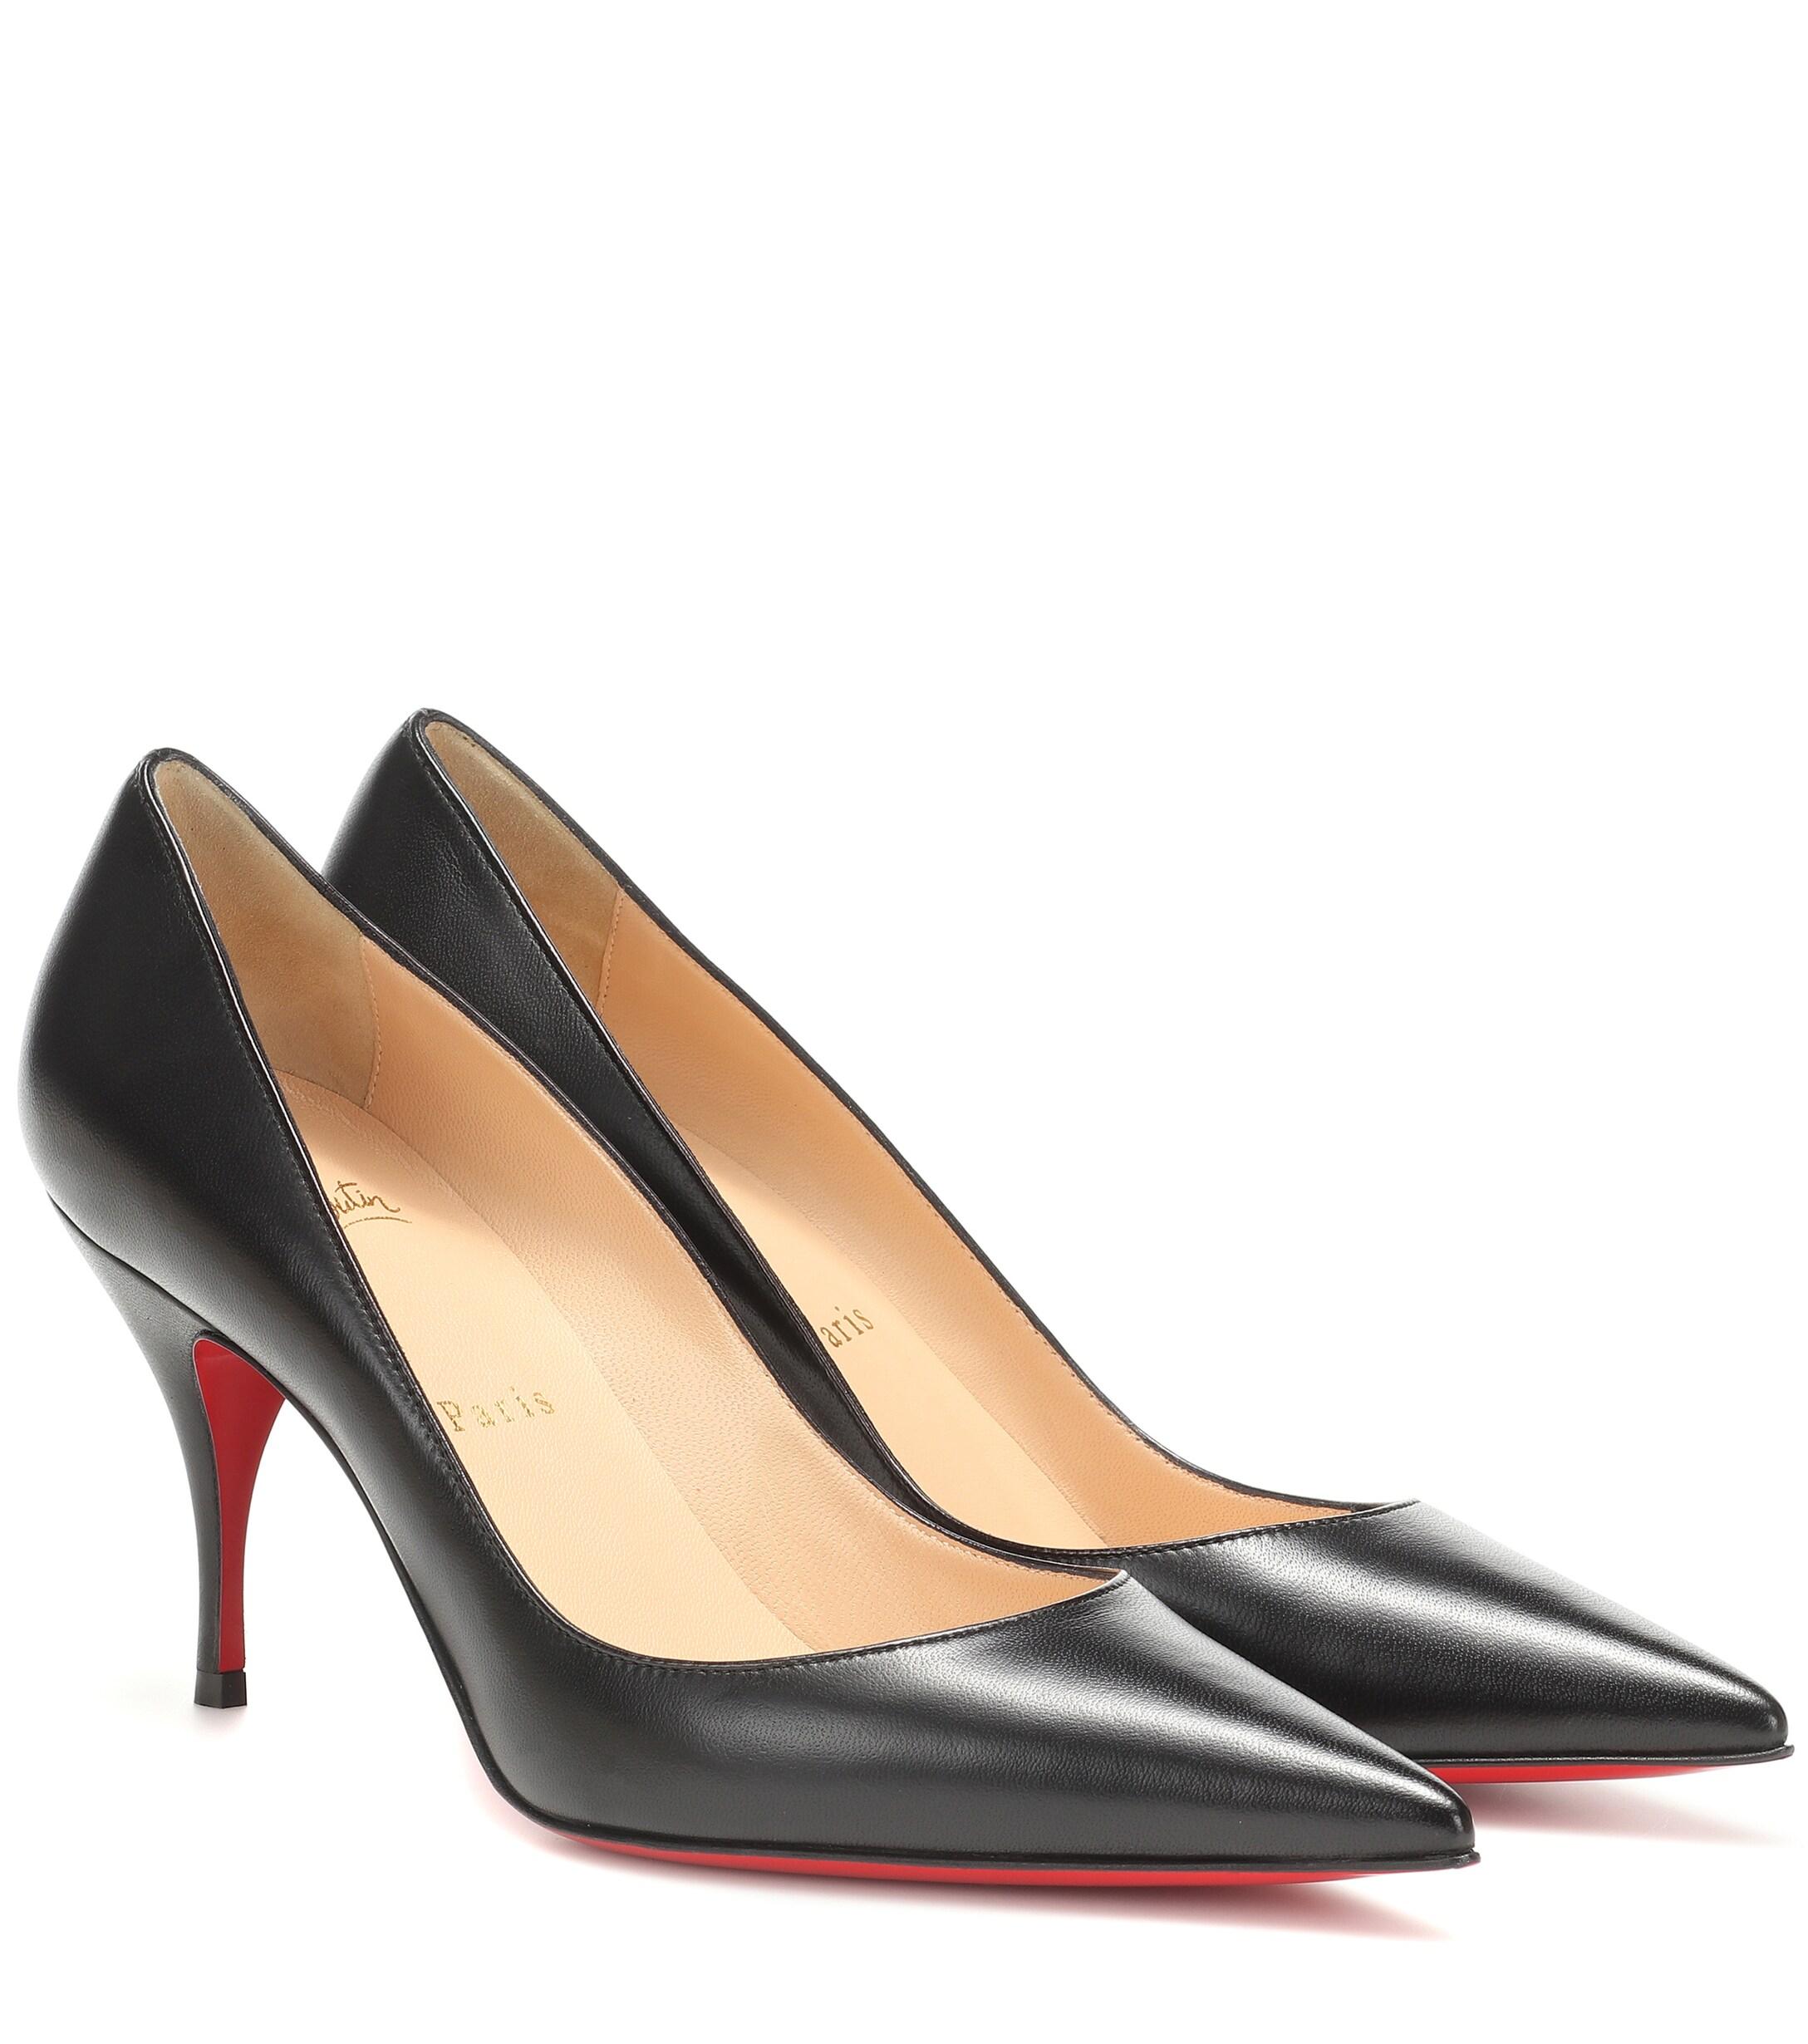 Christian Louboutin Clare 80 Nappa Leather Pumps in Black - Lyst